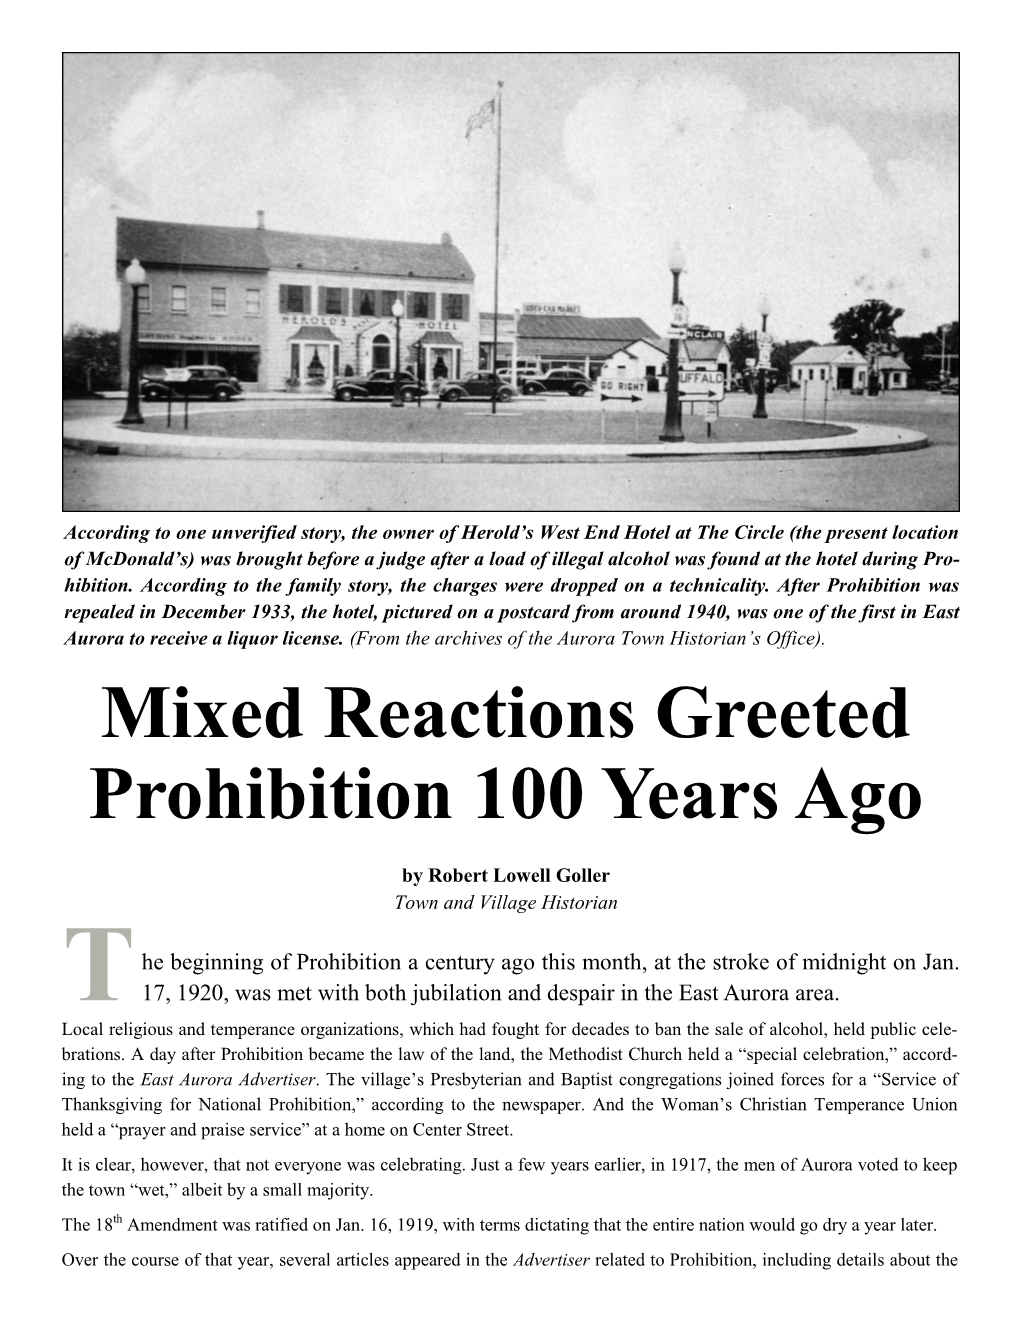 Mixed Reactions Greeted Prohibition 100 Years Ago